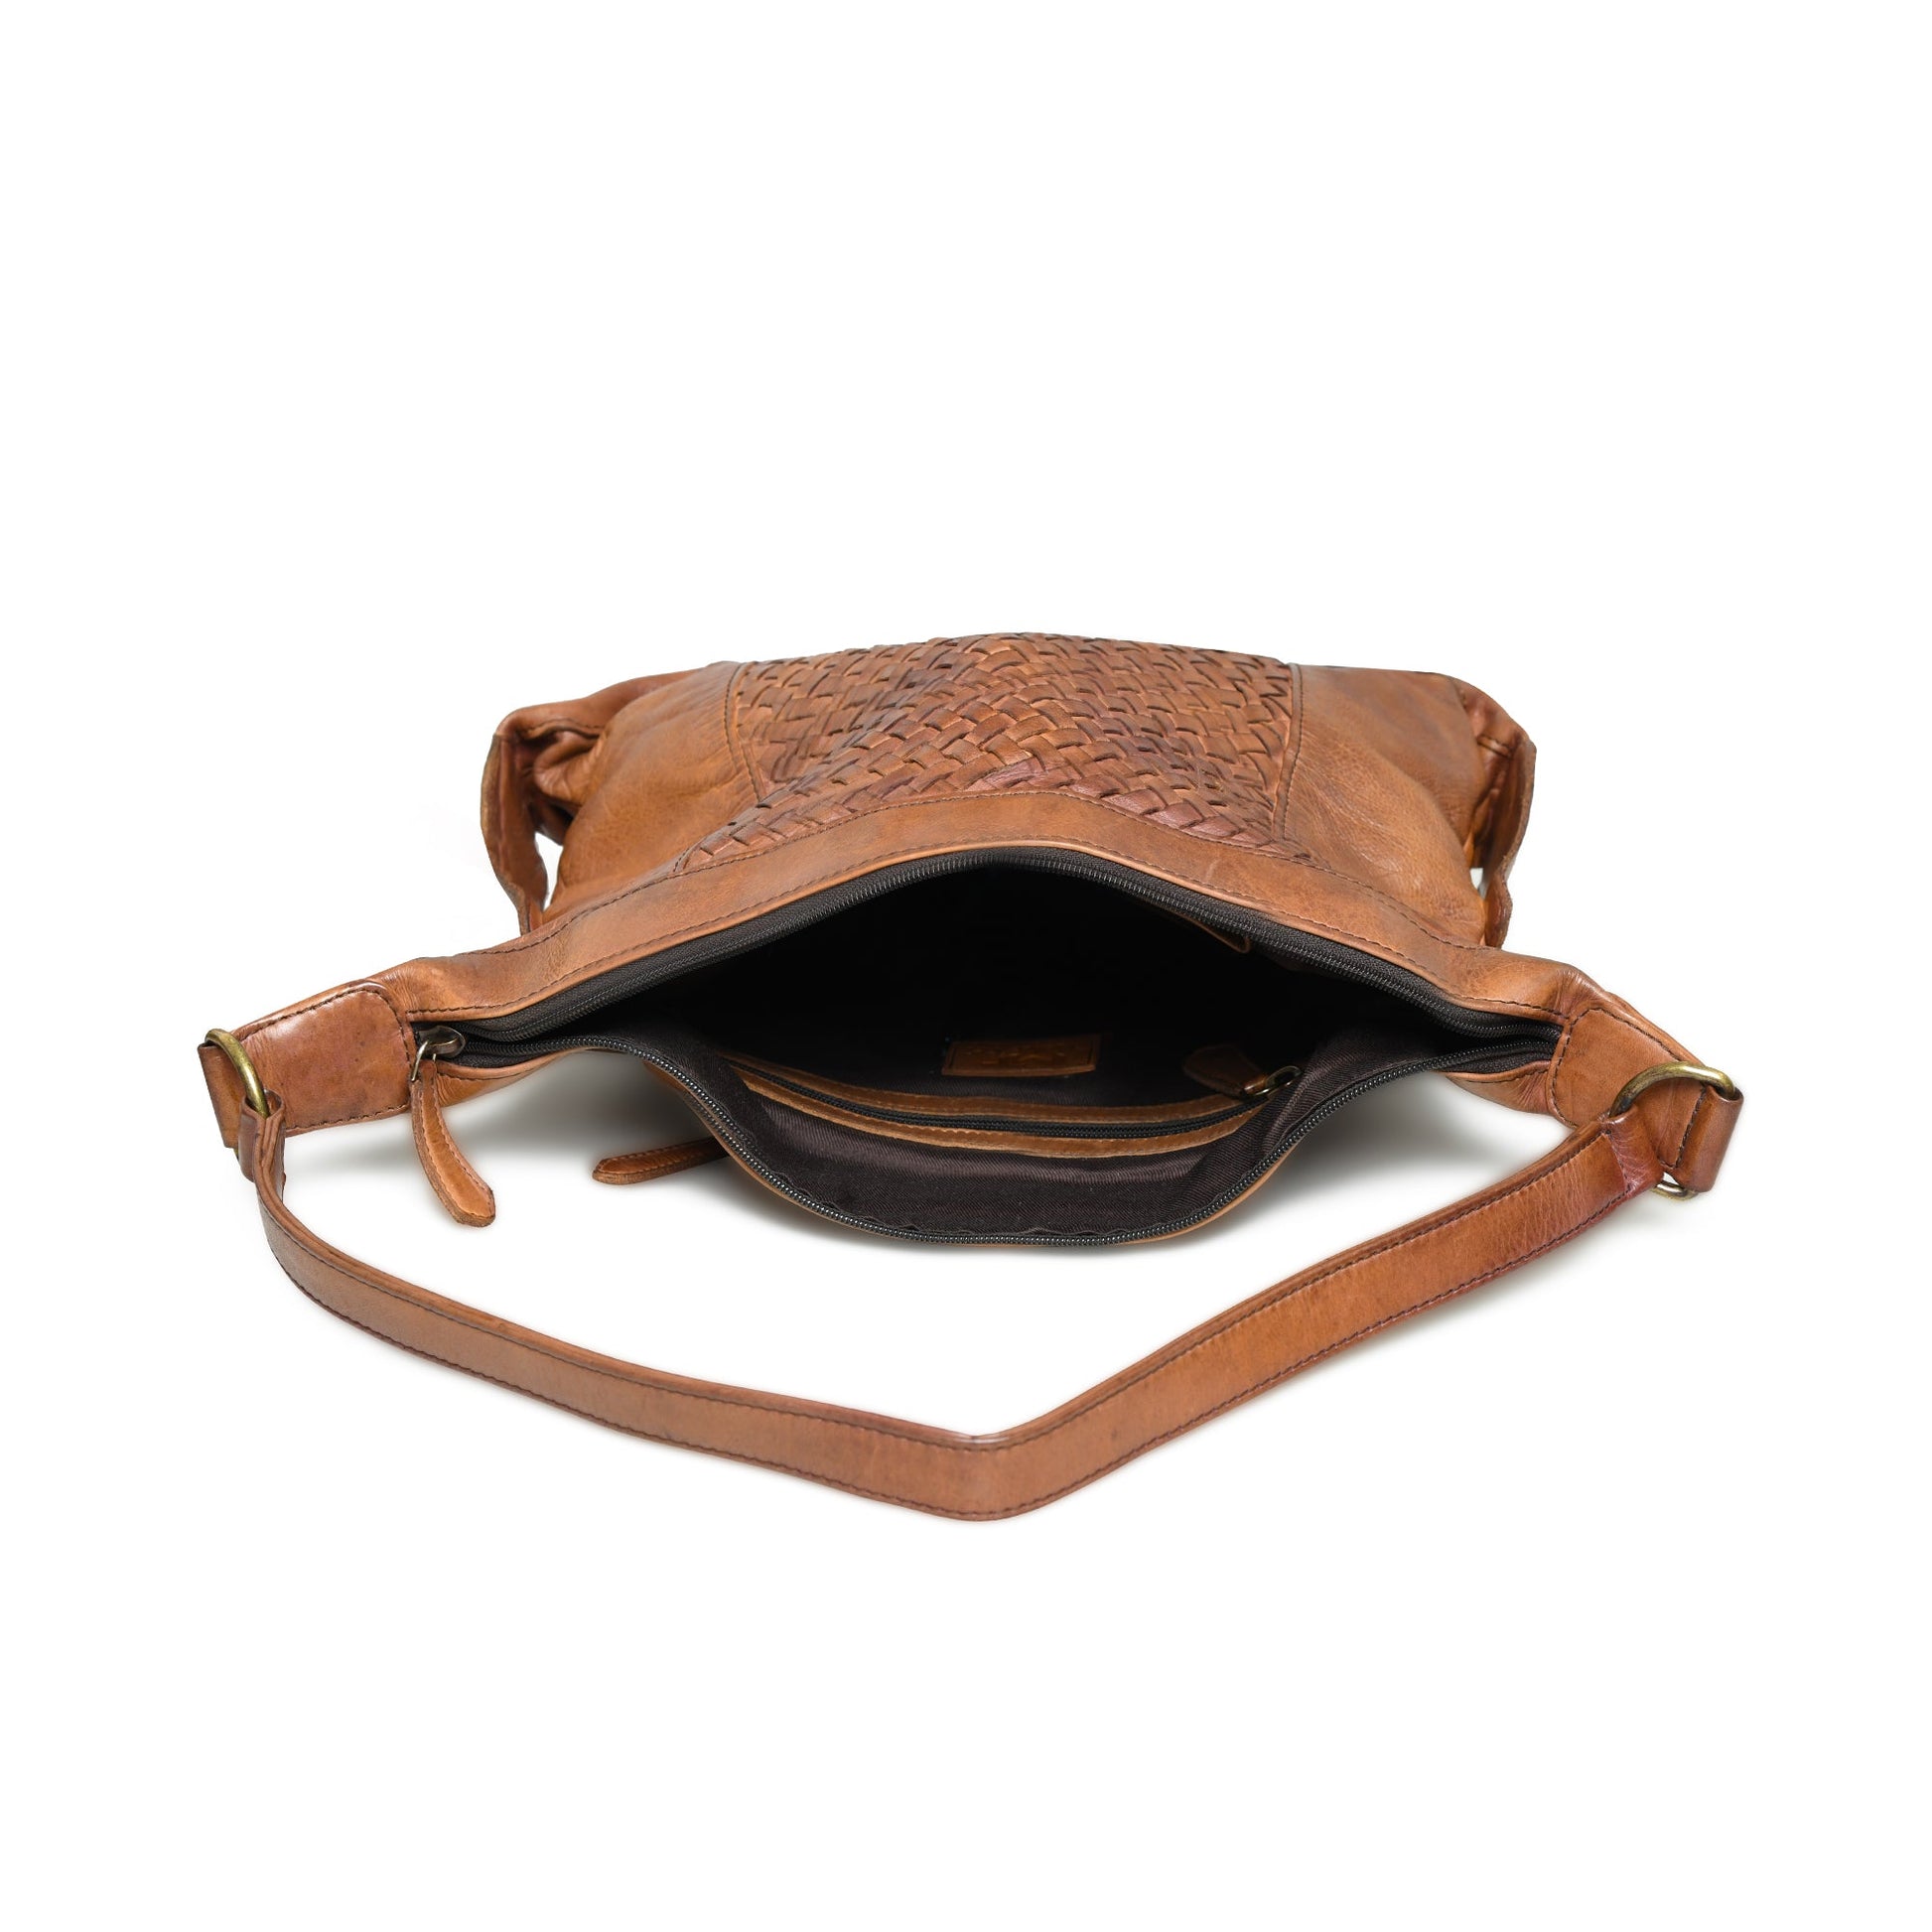 Textured Leather Shoulder Sling, Brown - The Tool Store